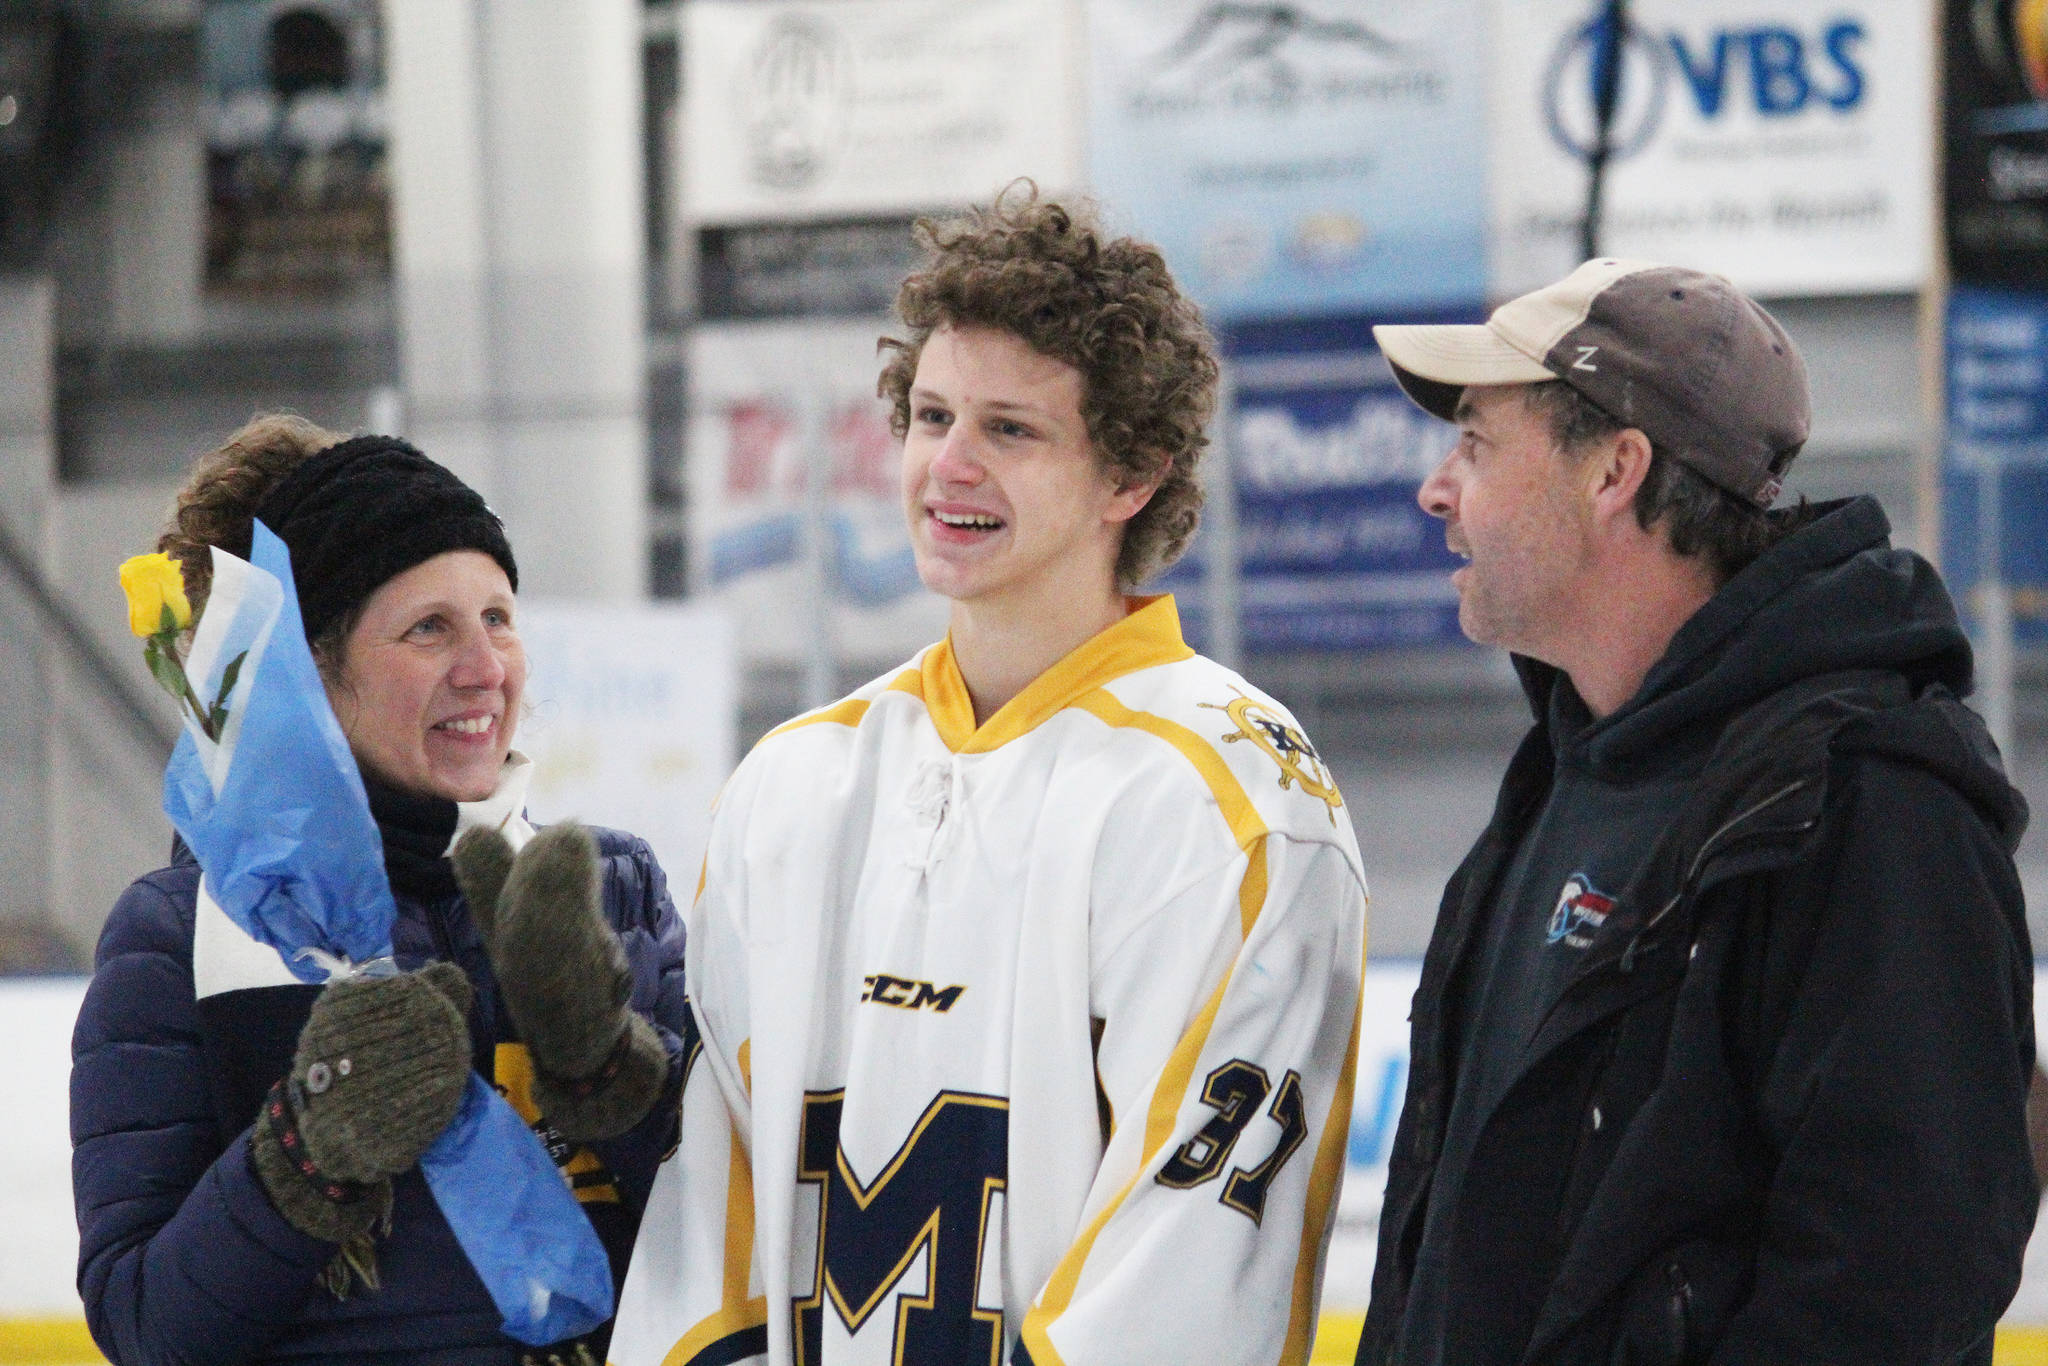 Homer senior Lee Lowe is honored with his parents on Senior Night for the Homer High School hockey team Thursday, Jan. 24, 2019 at Kevin Bell Arena in Homer, Alaska. The Mariners defeated Houston High School 10-1. (Photo by Megan Pacer/Homer News)